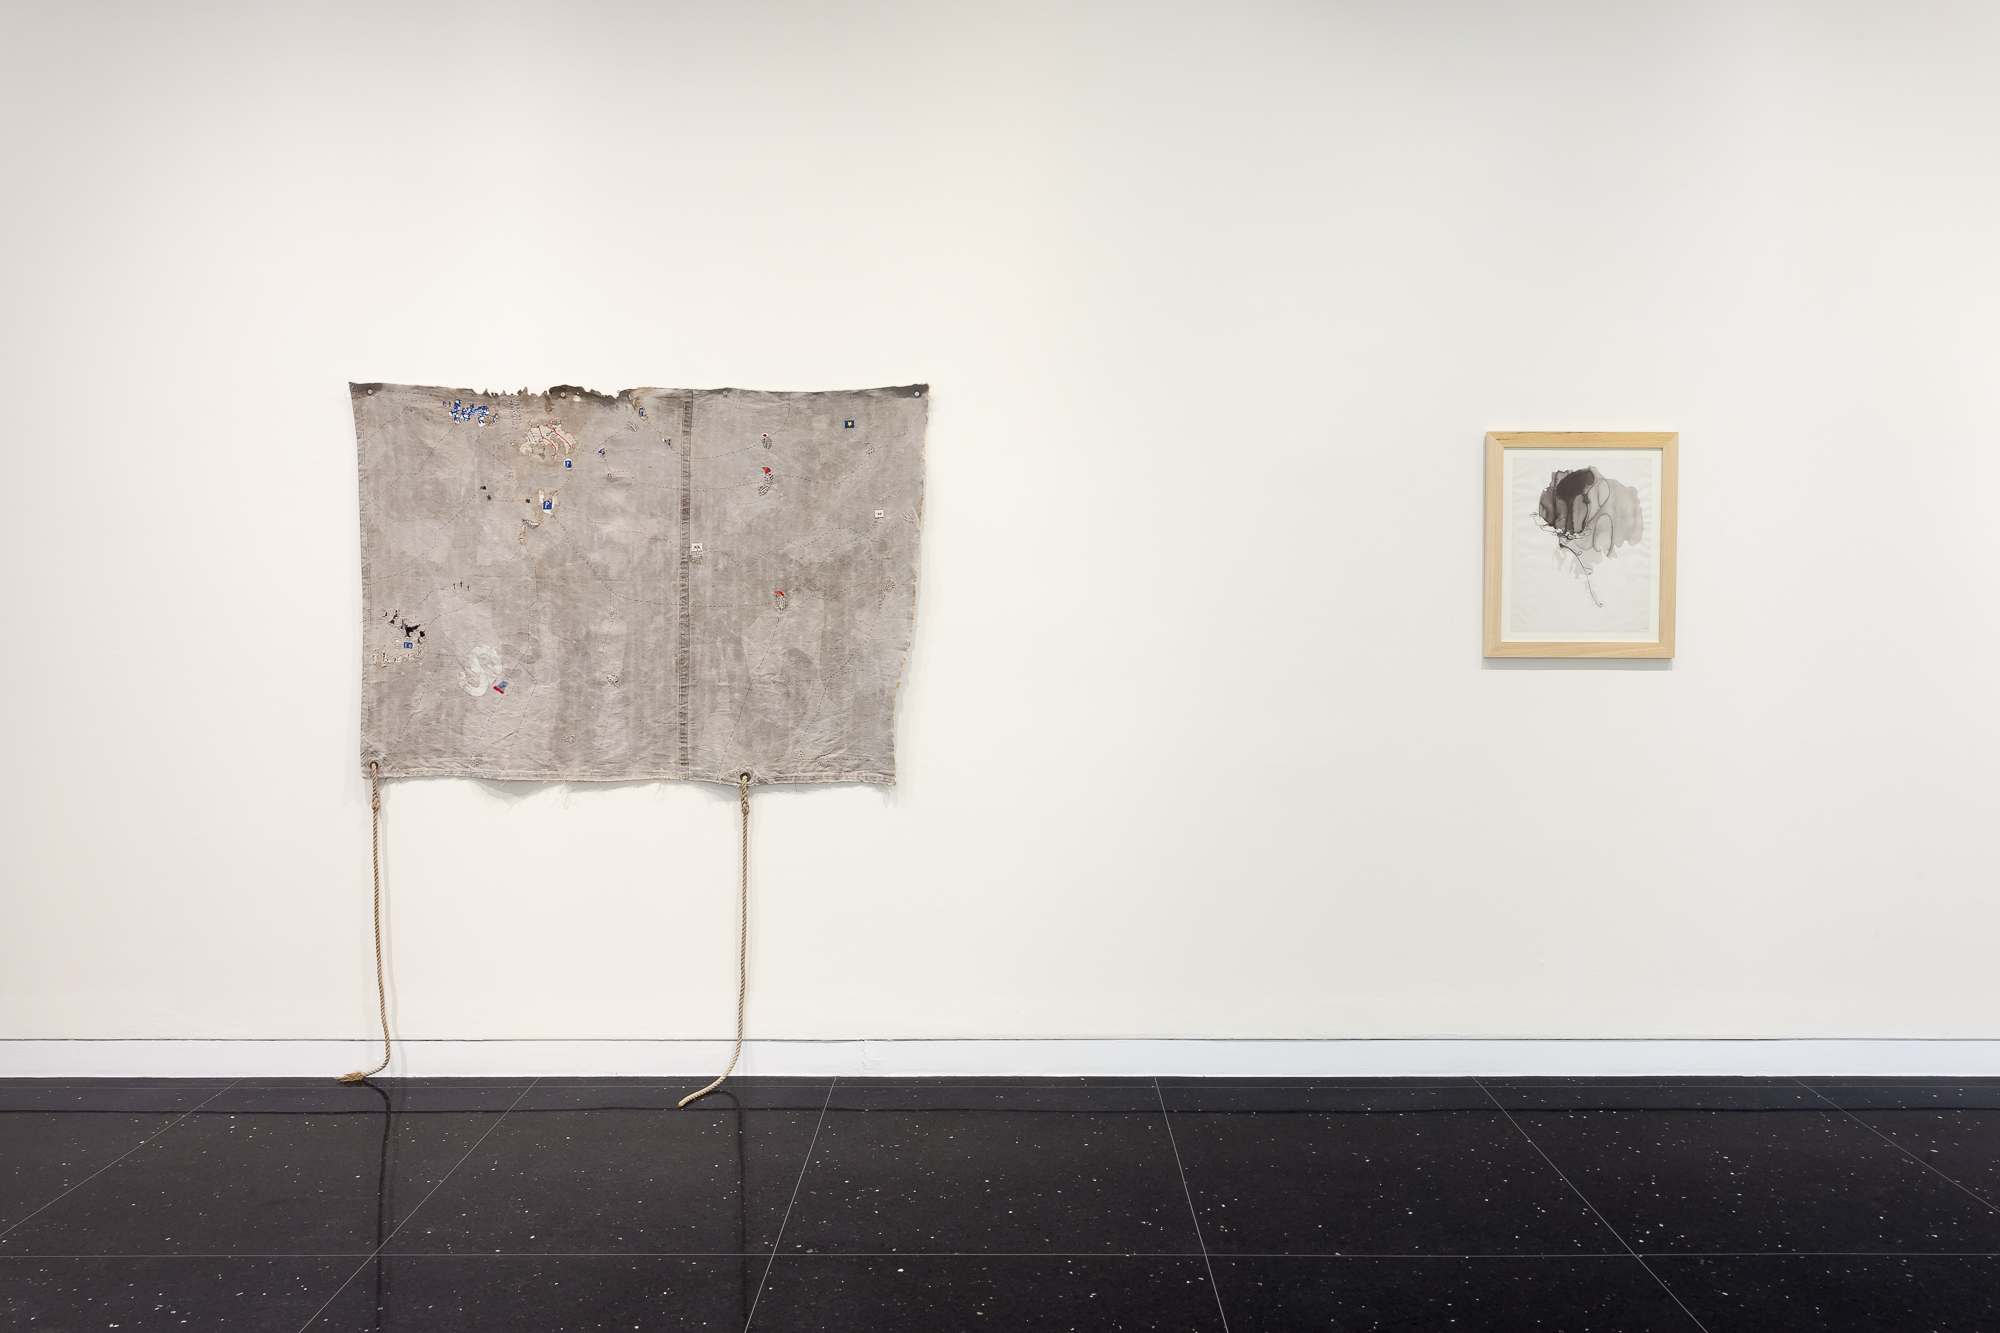 A pale gray, somewhat ragged looking textile hangs on a white gallery wall next to a small, square image in a white frame.